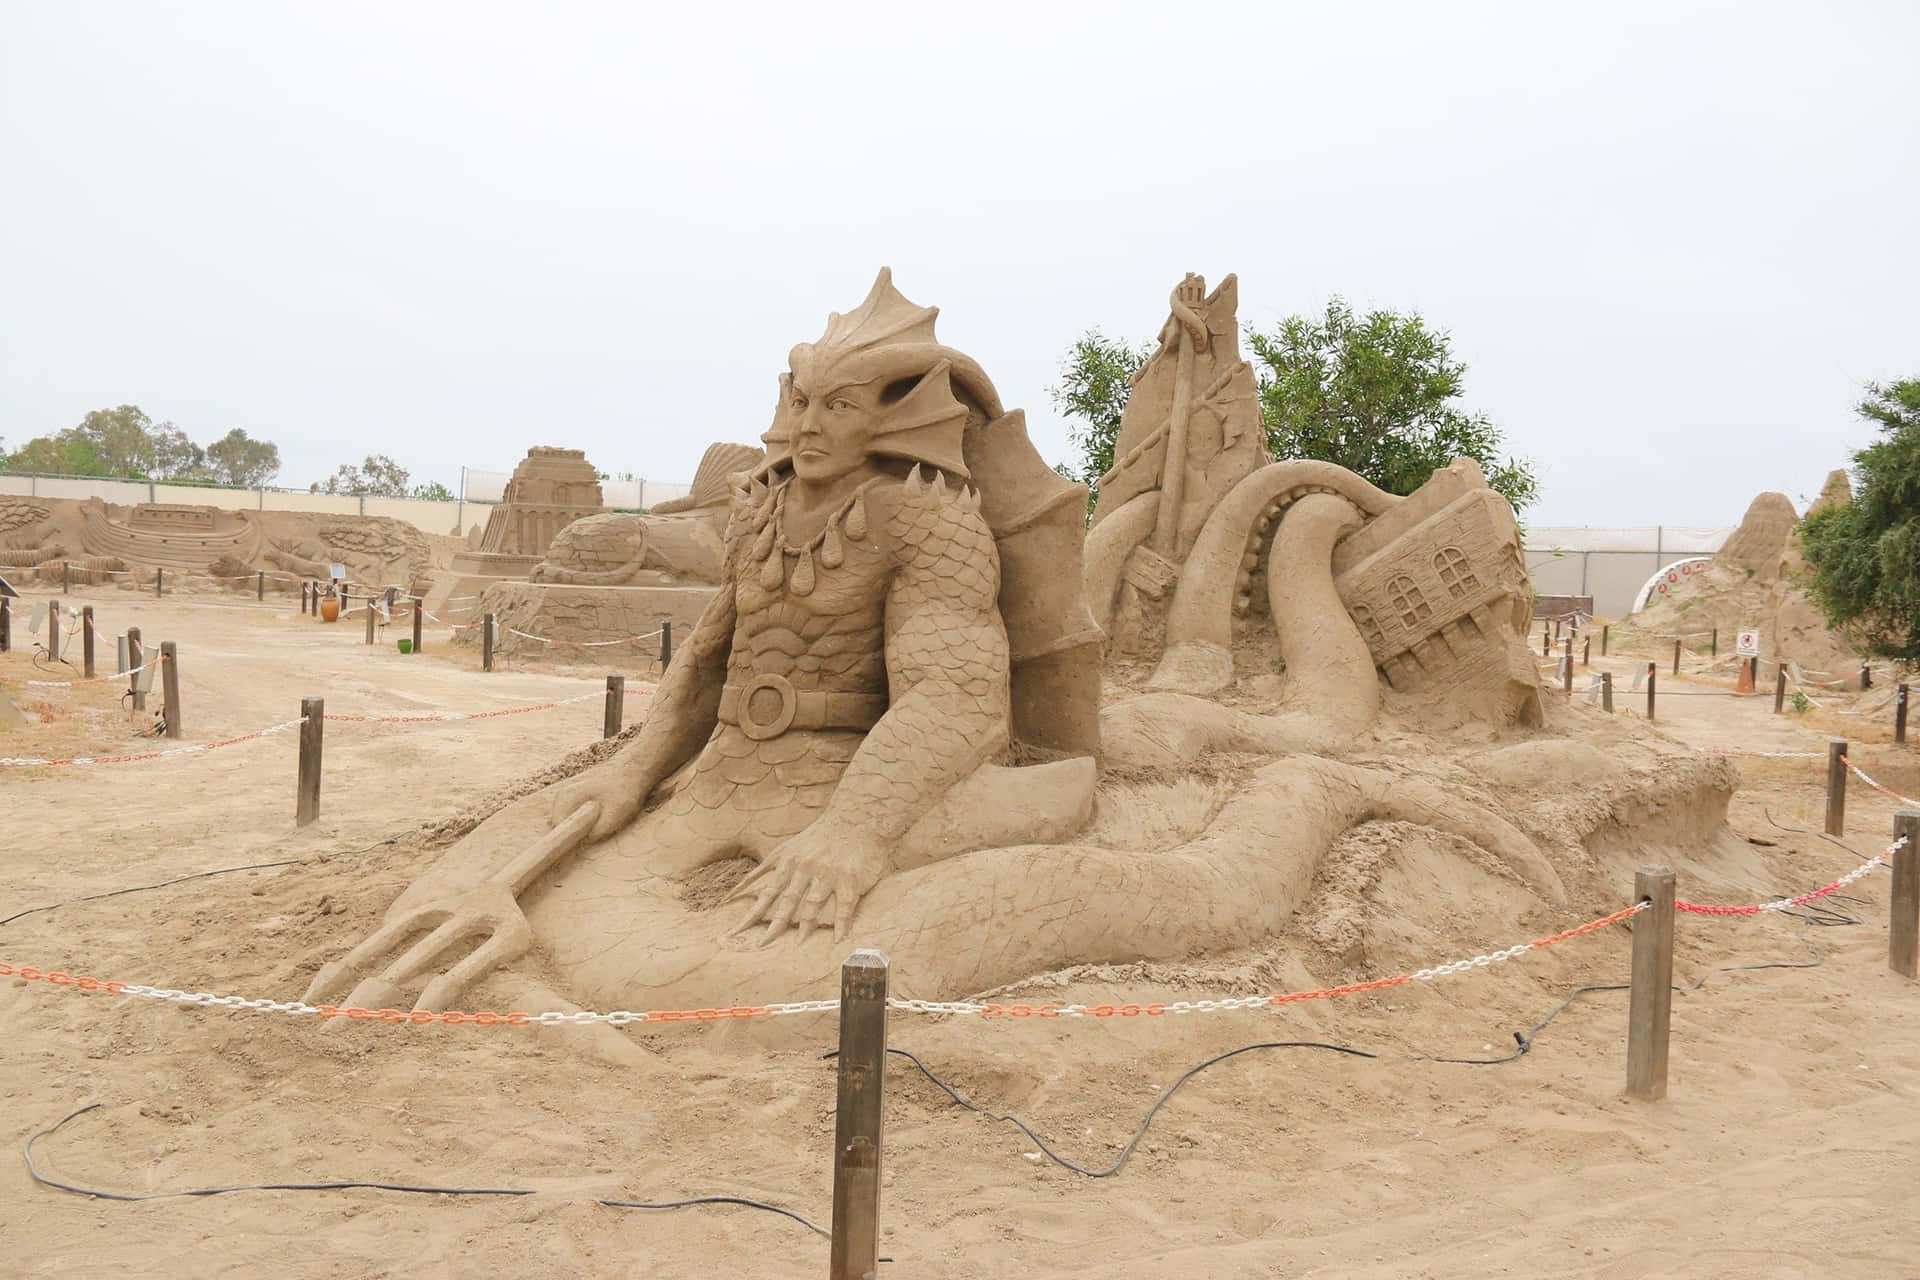 A Sand Sculpture Is On Display In A Desert